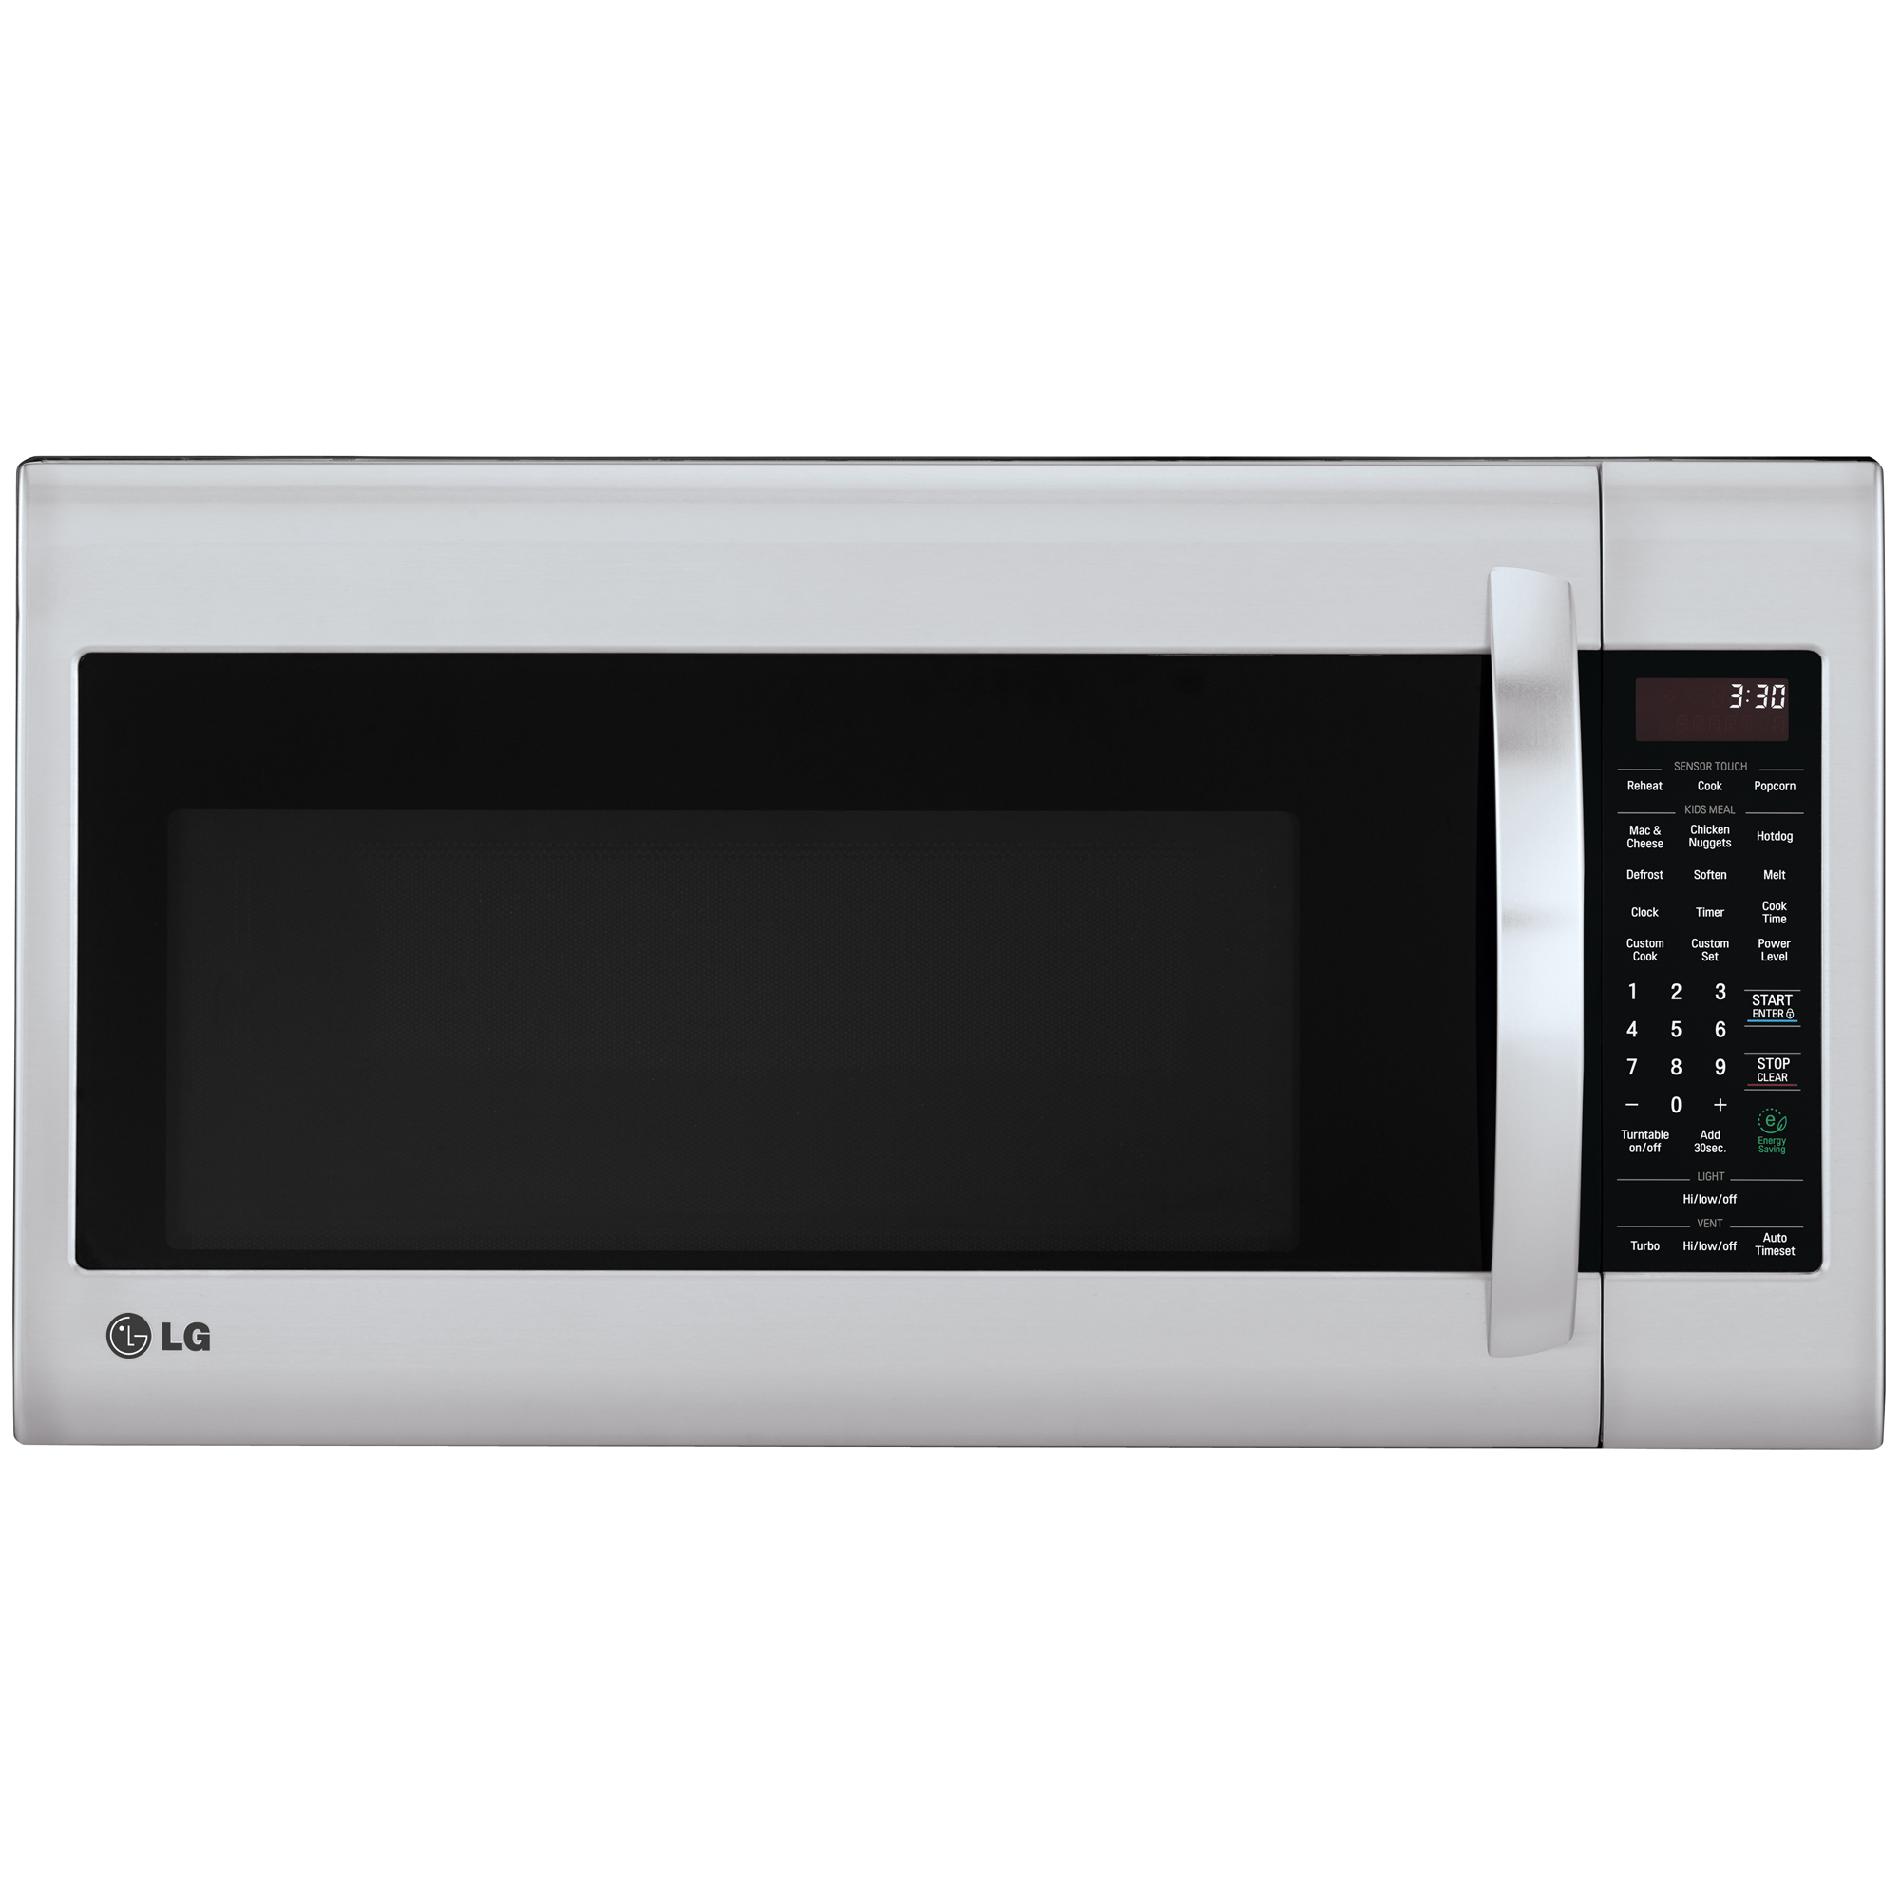 LG LMV2031ST 2.0 cu. ft. Over-the-Range Microwave Oven – Stainless Steel